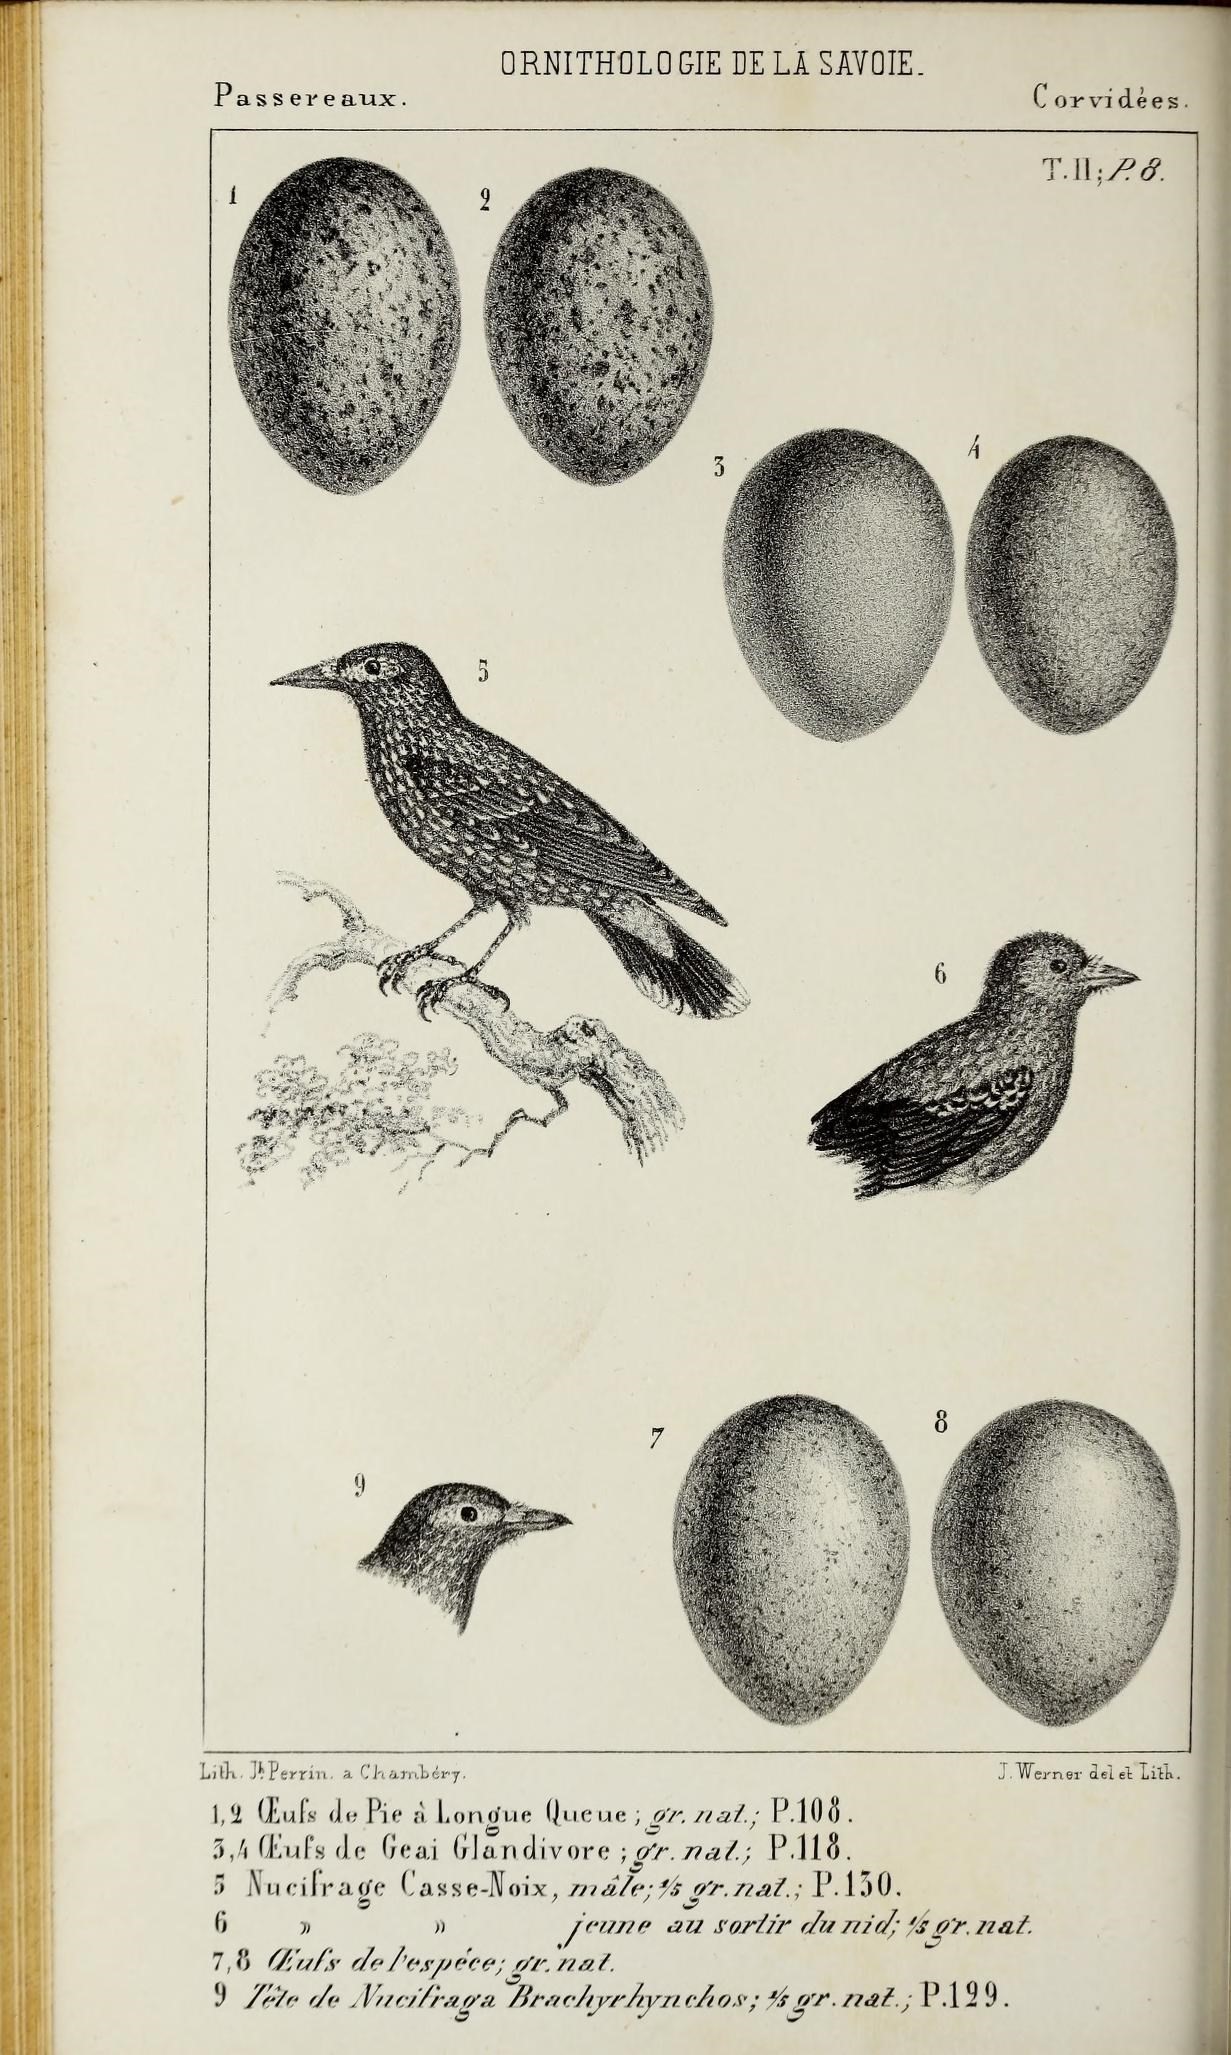 various birds are shown on an old book